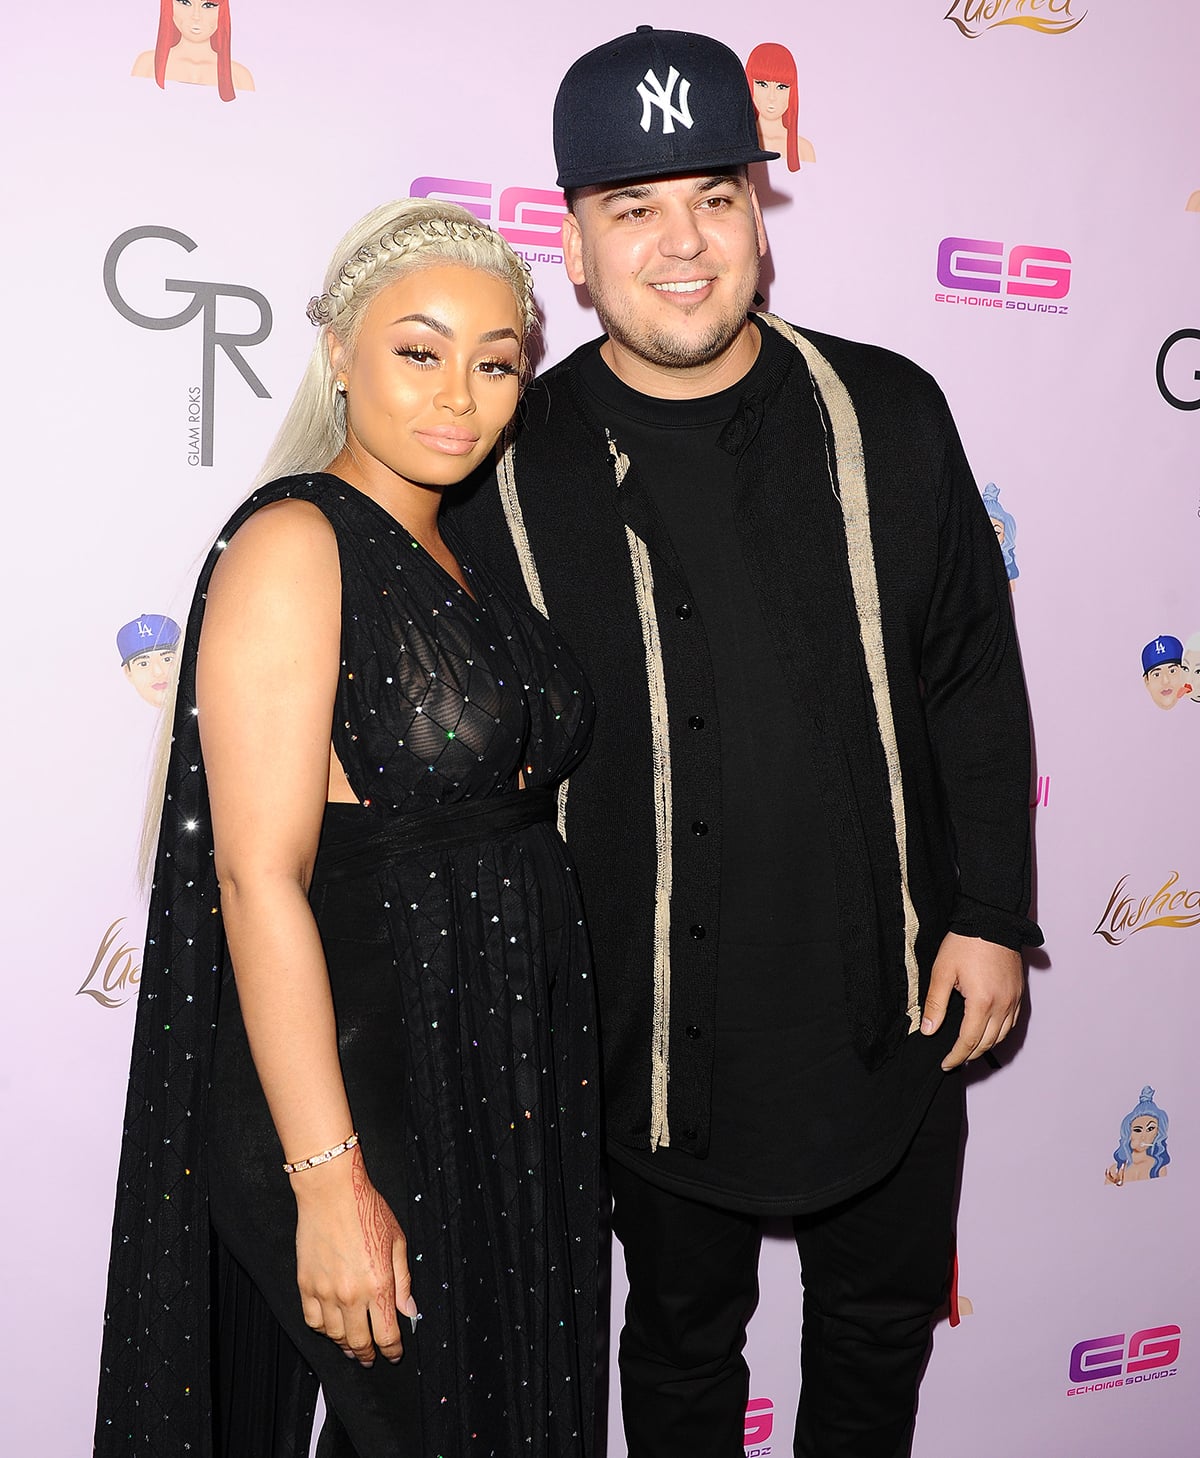 Following her breakup with Tyga, Blac Chyna moved on with Rob Kardashian, with whom she shares a daughter